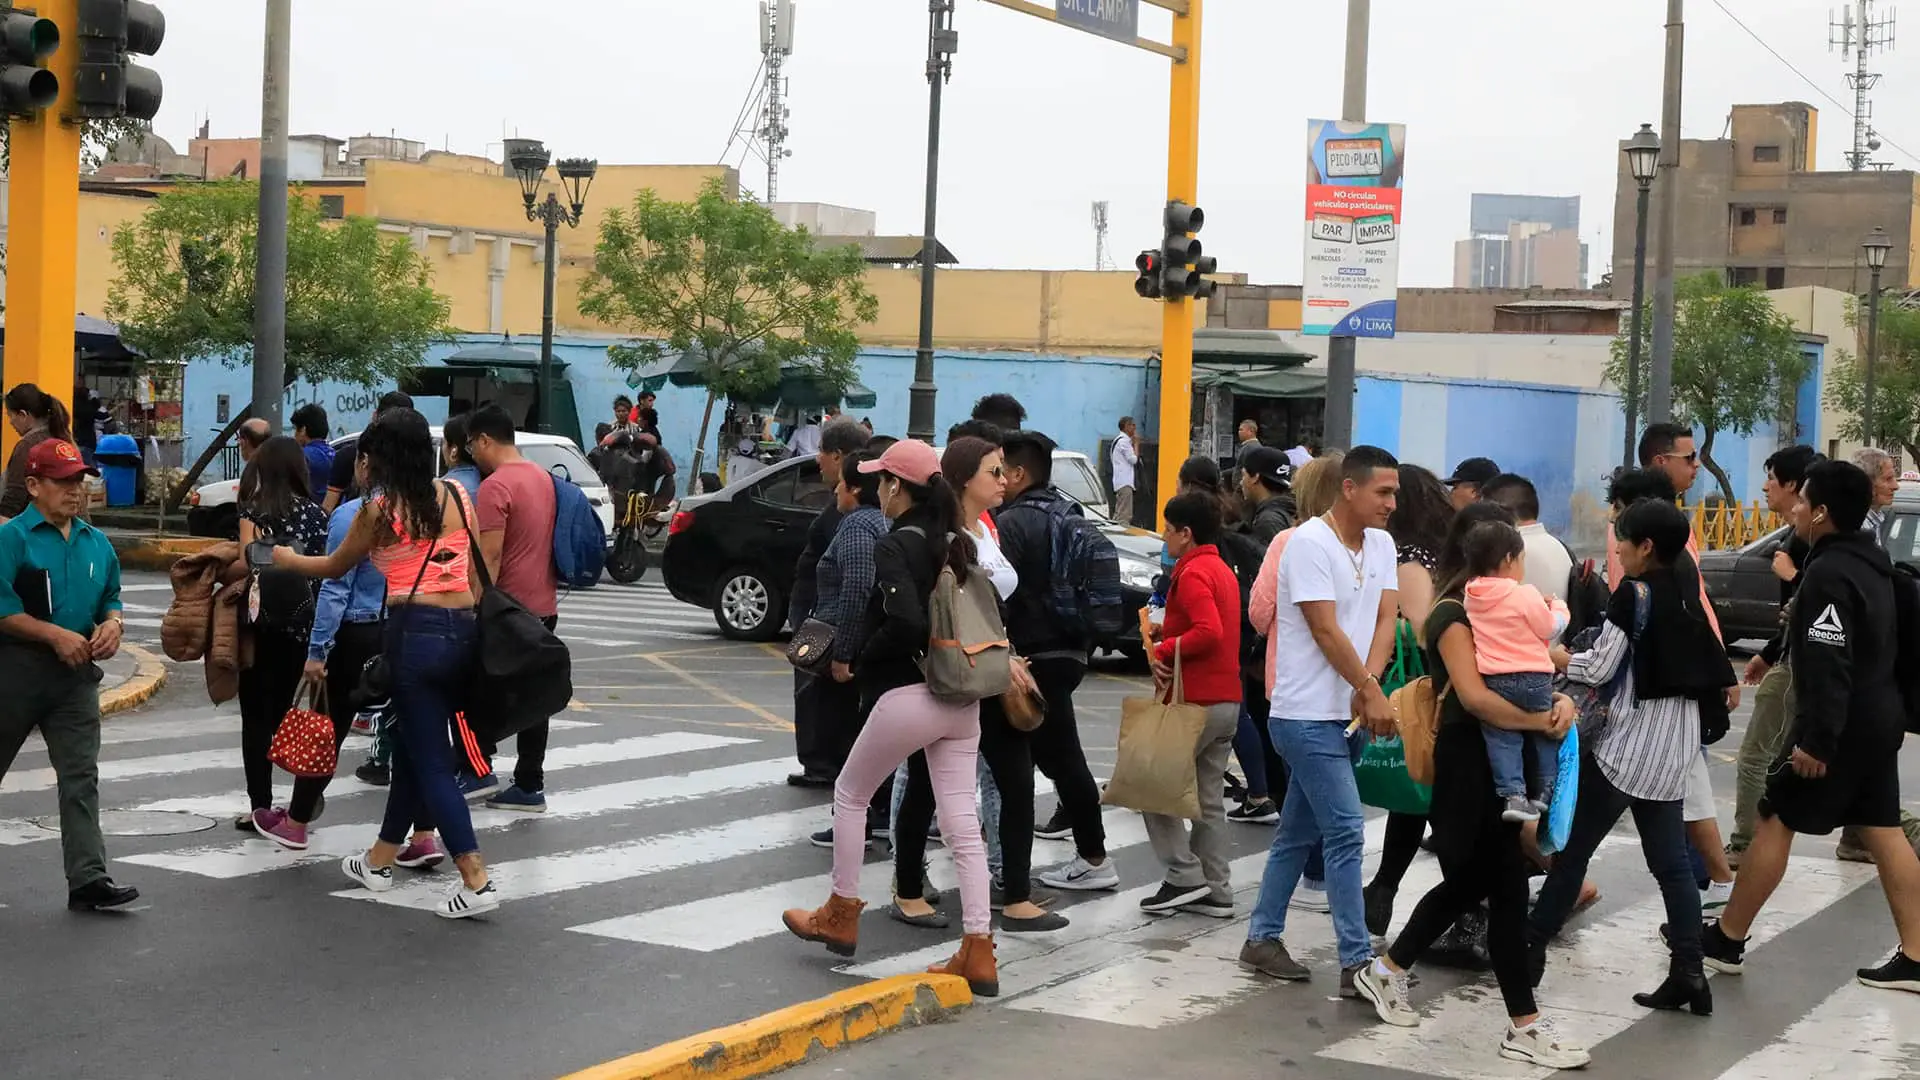 11Busy crosswalk in one of the many intersections of the crowded city center of Lima | Responsible Travel Peru